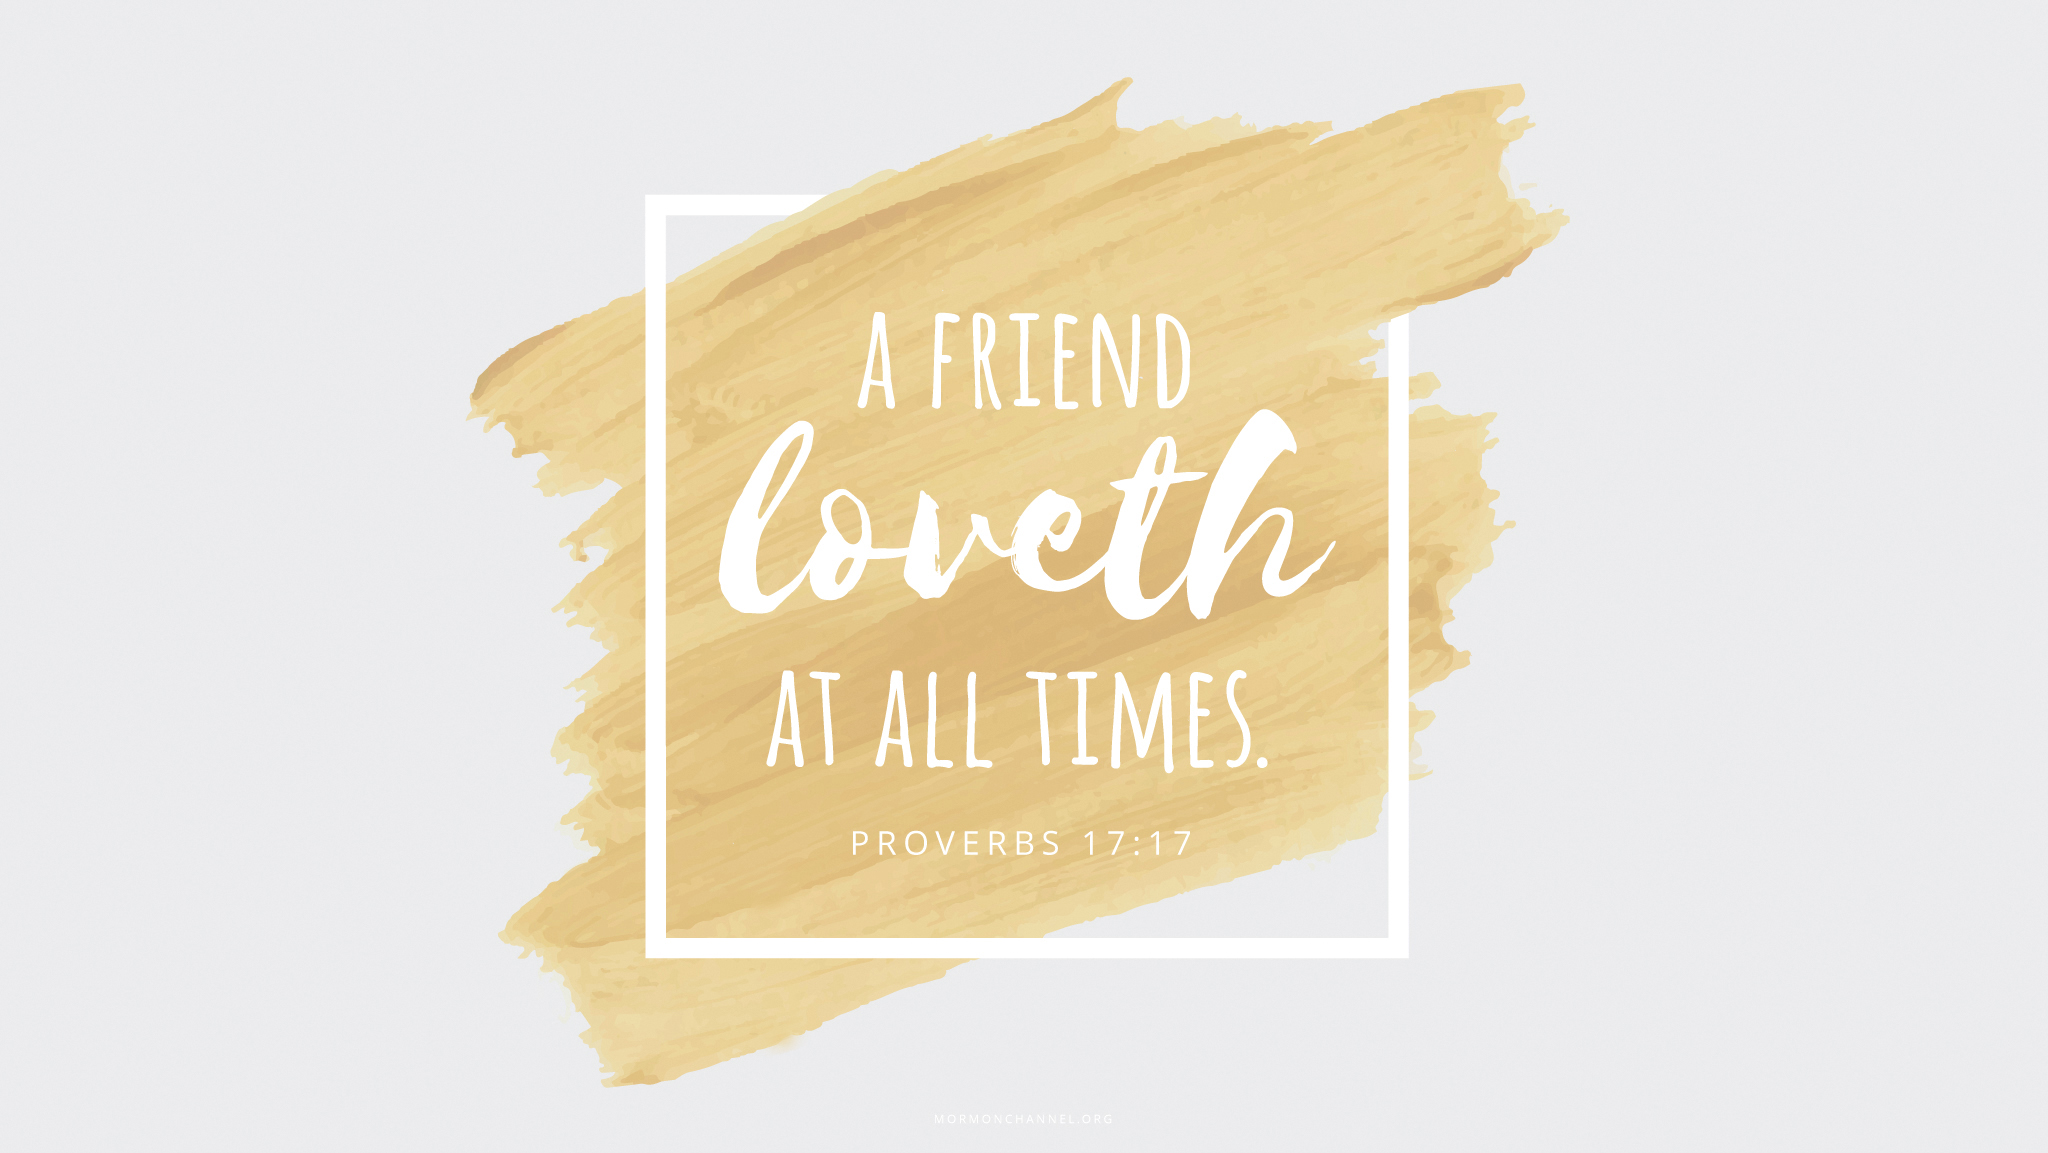 A wash of gold paint with a quote from Proverbs 17:17: “A friend loveth at all times.”